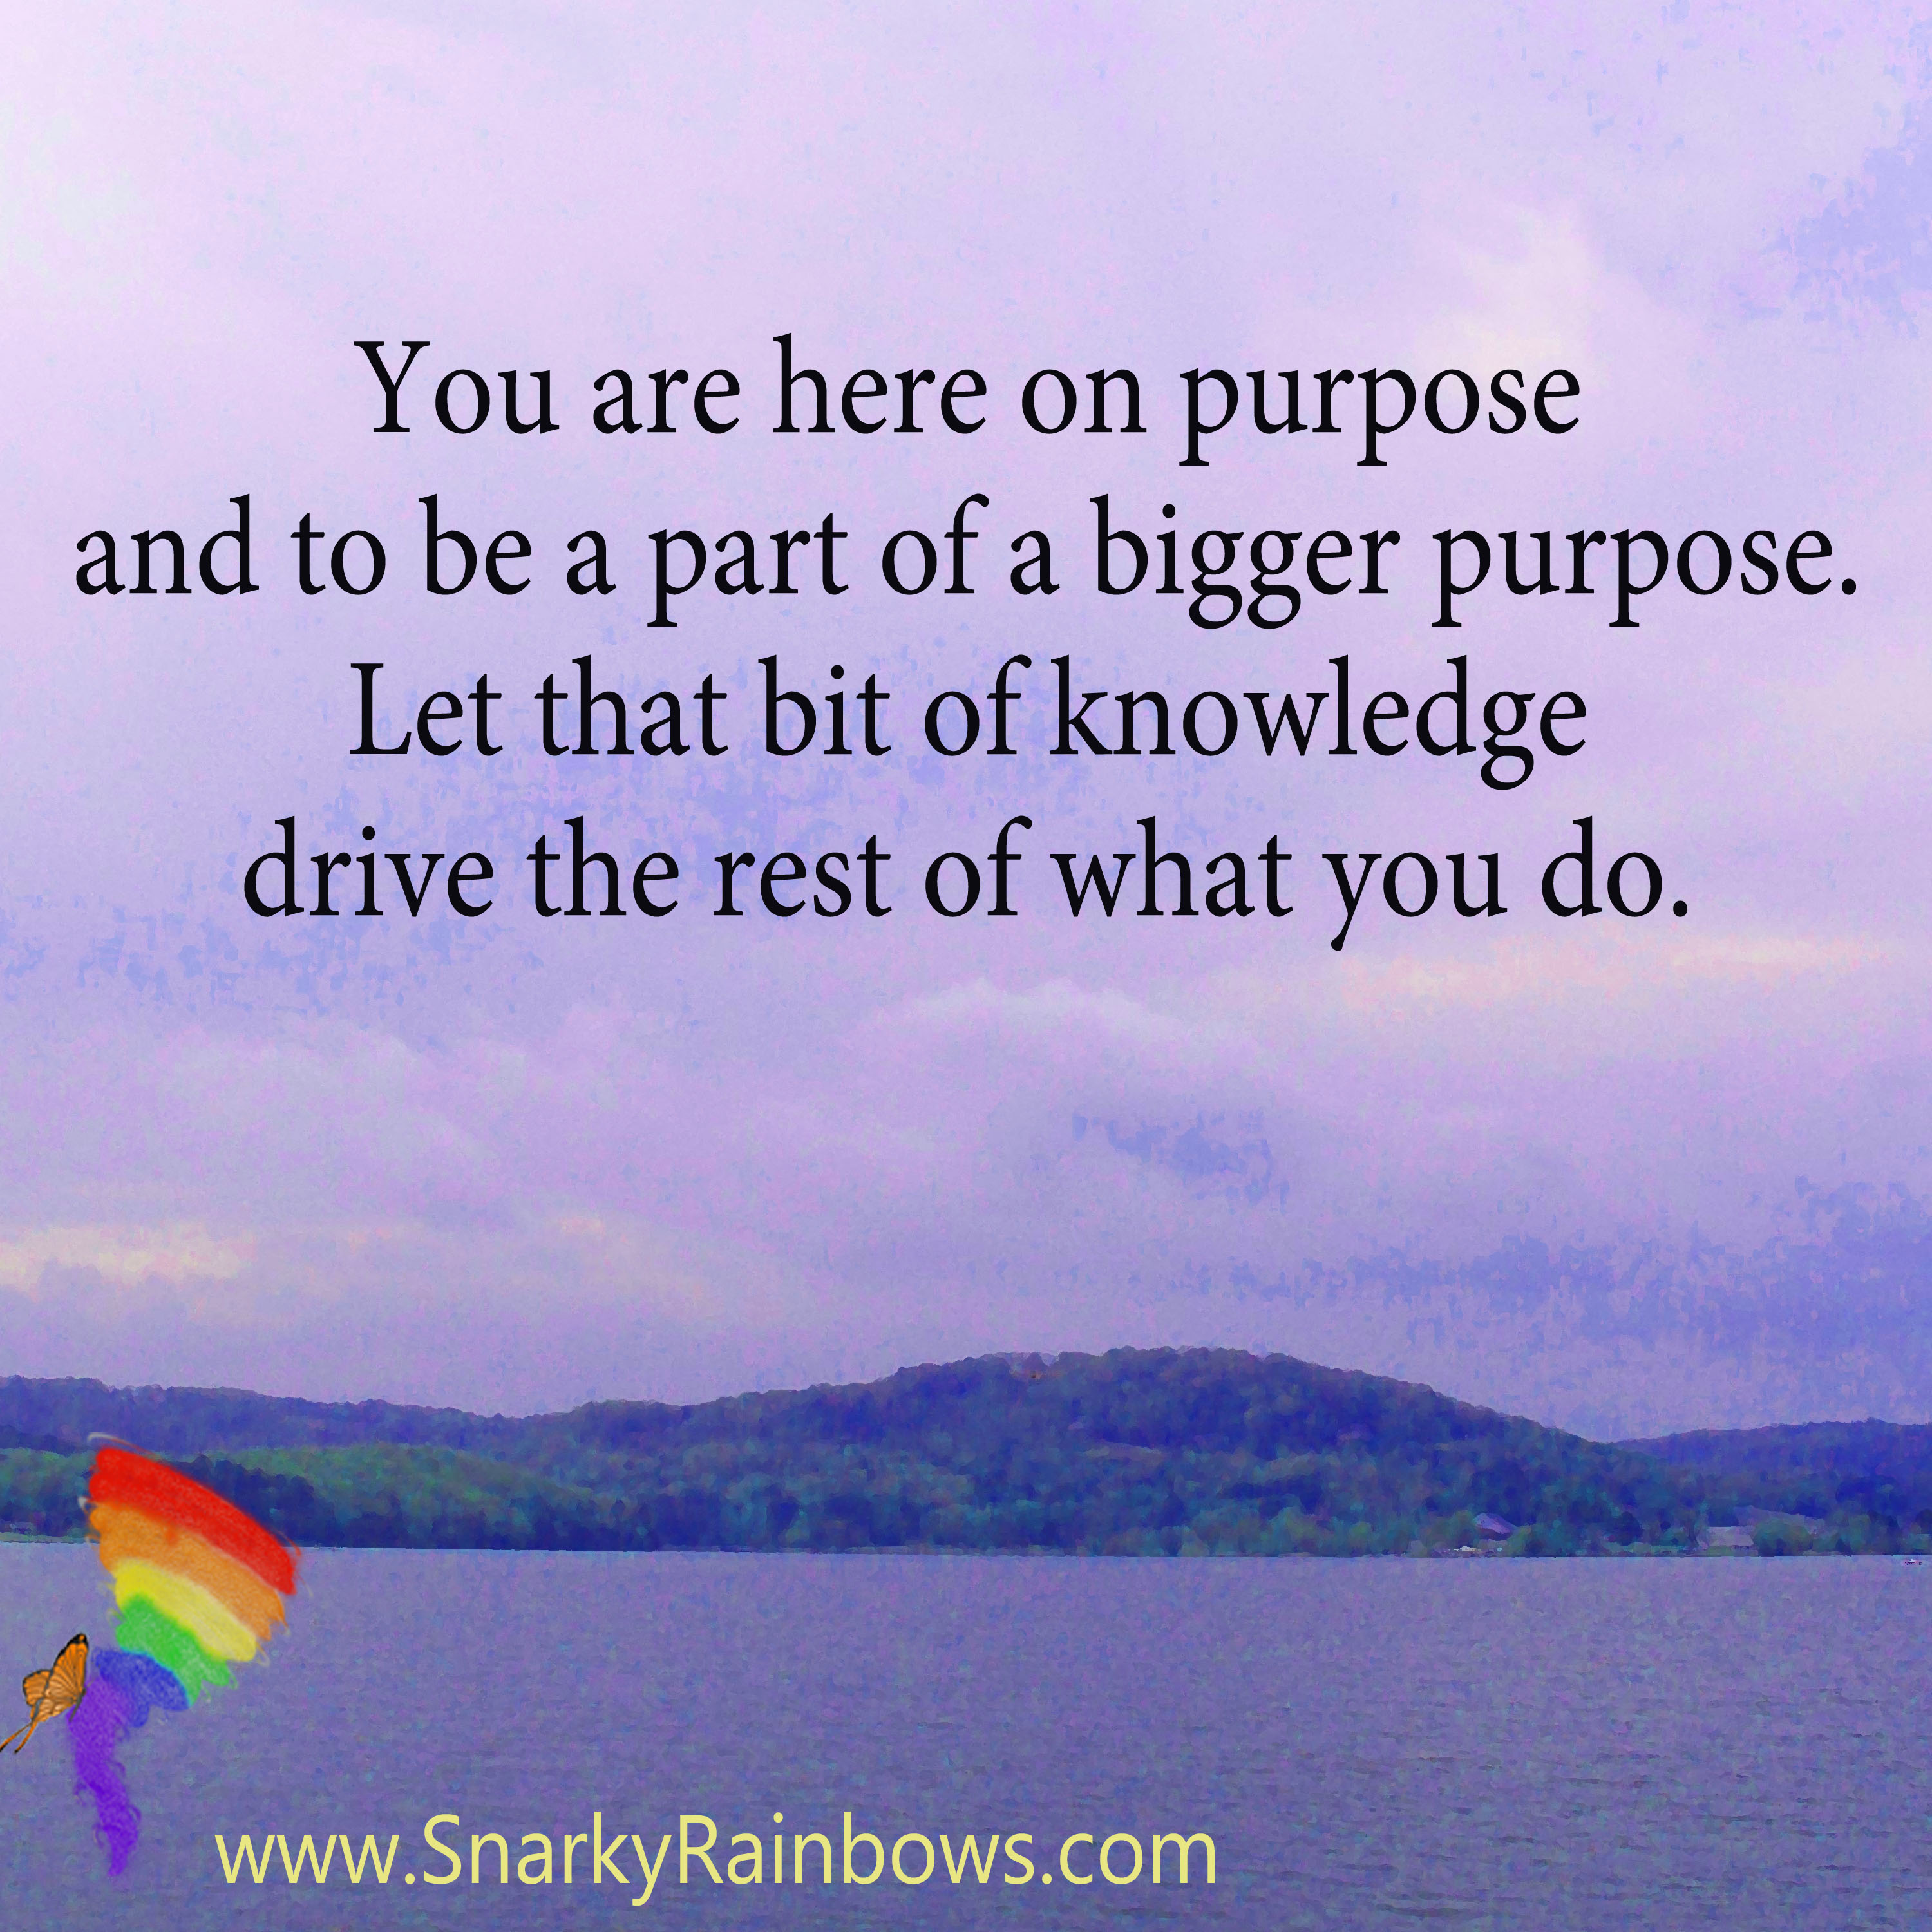 #QuoteoftheDay - you are here on purpose